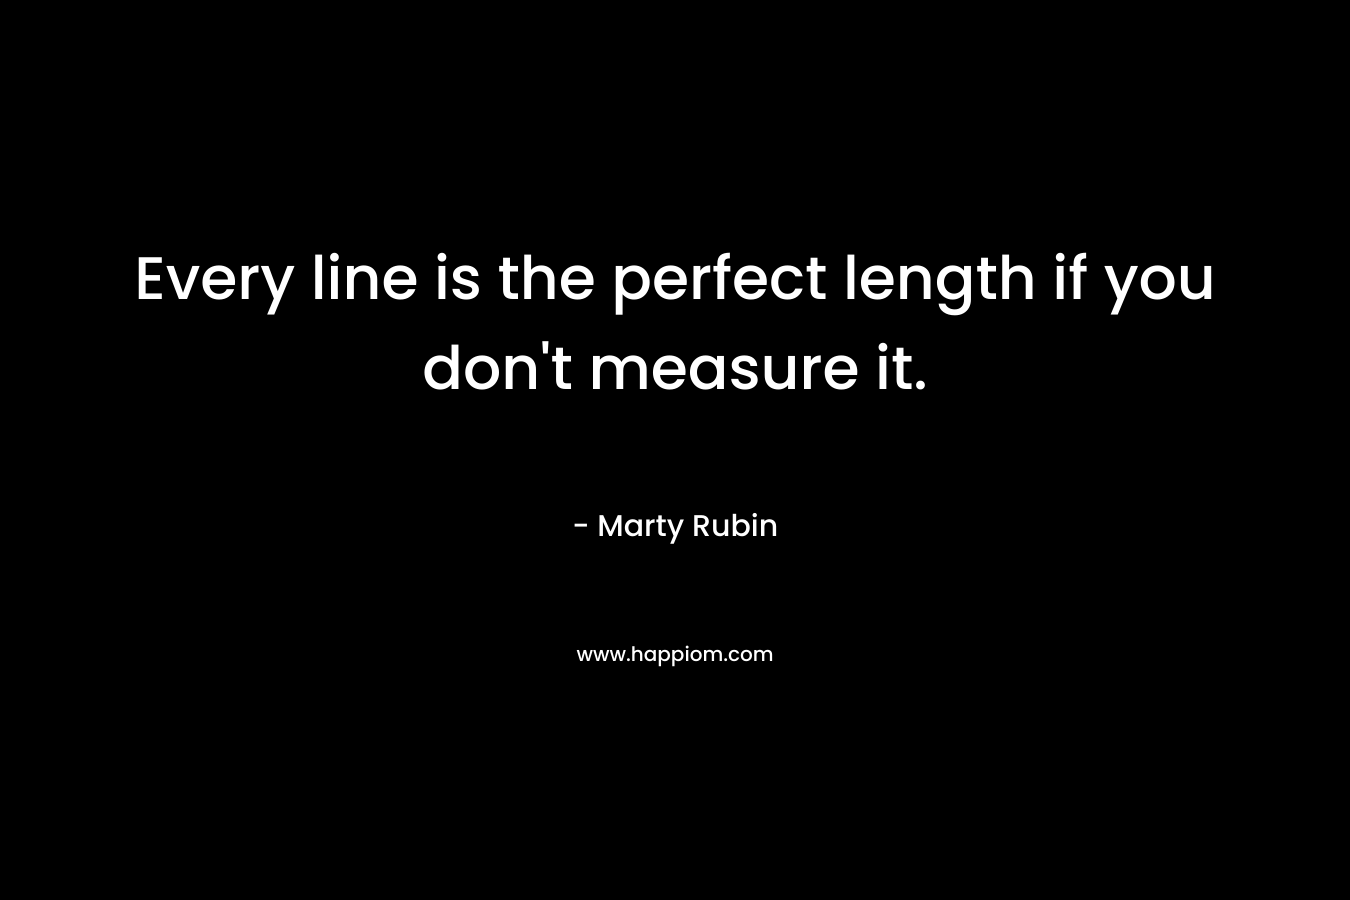 Every line is the perfect length if you don’t measure it. – Marty Rubin